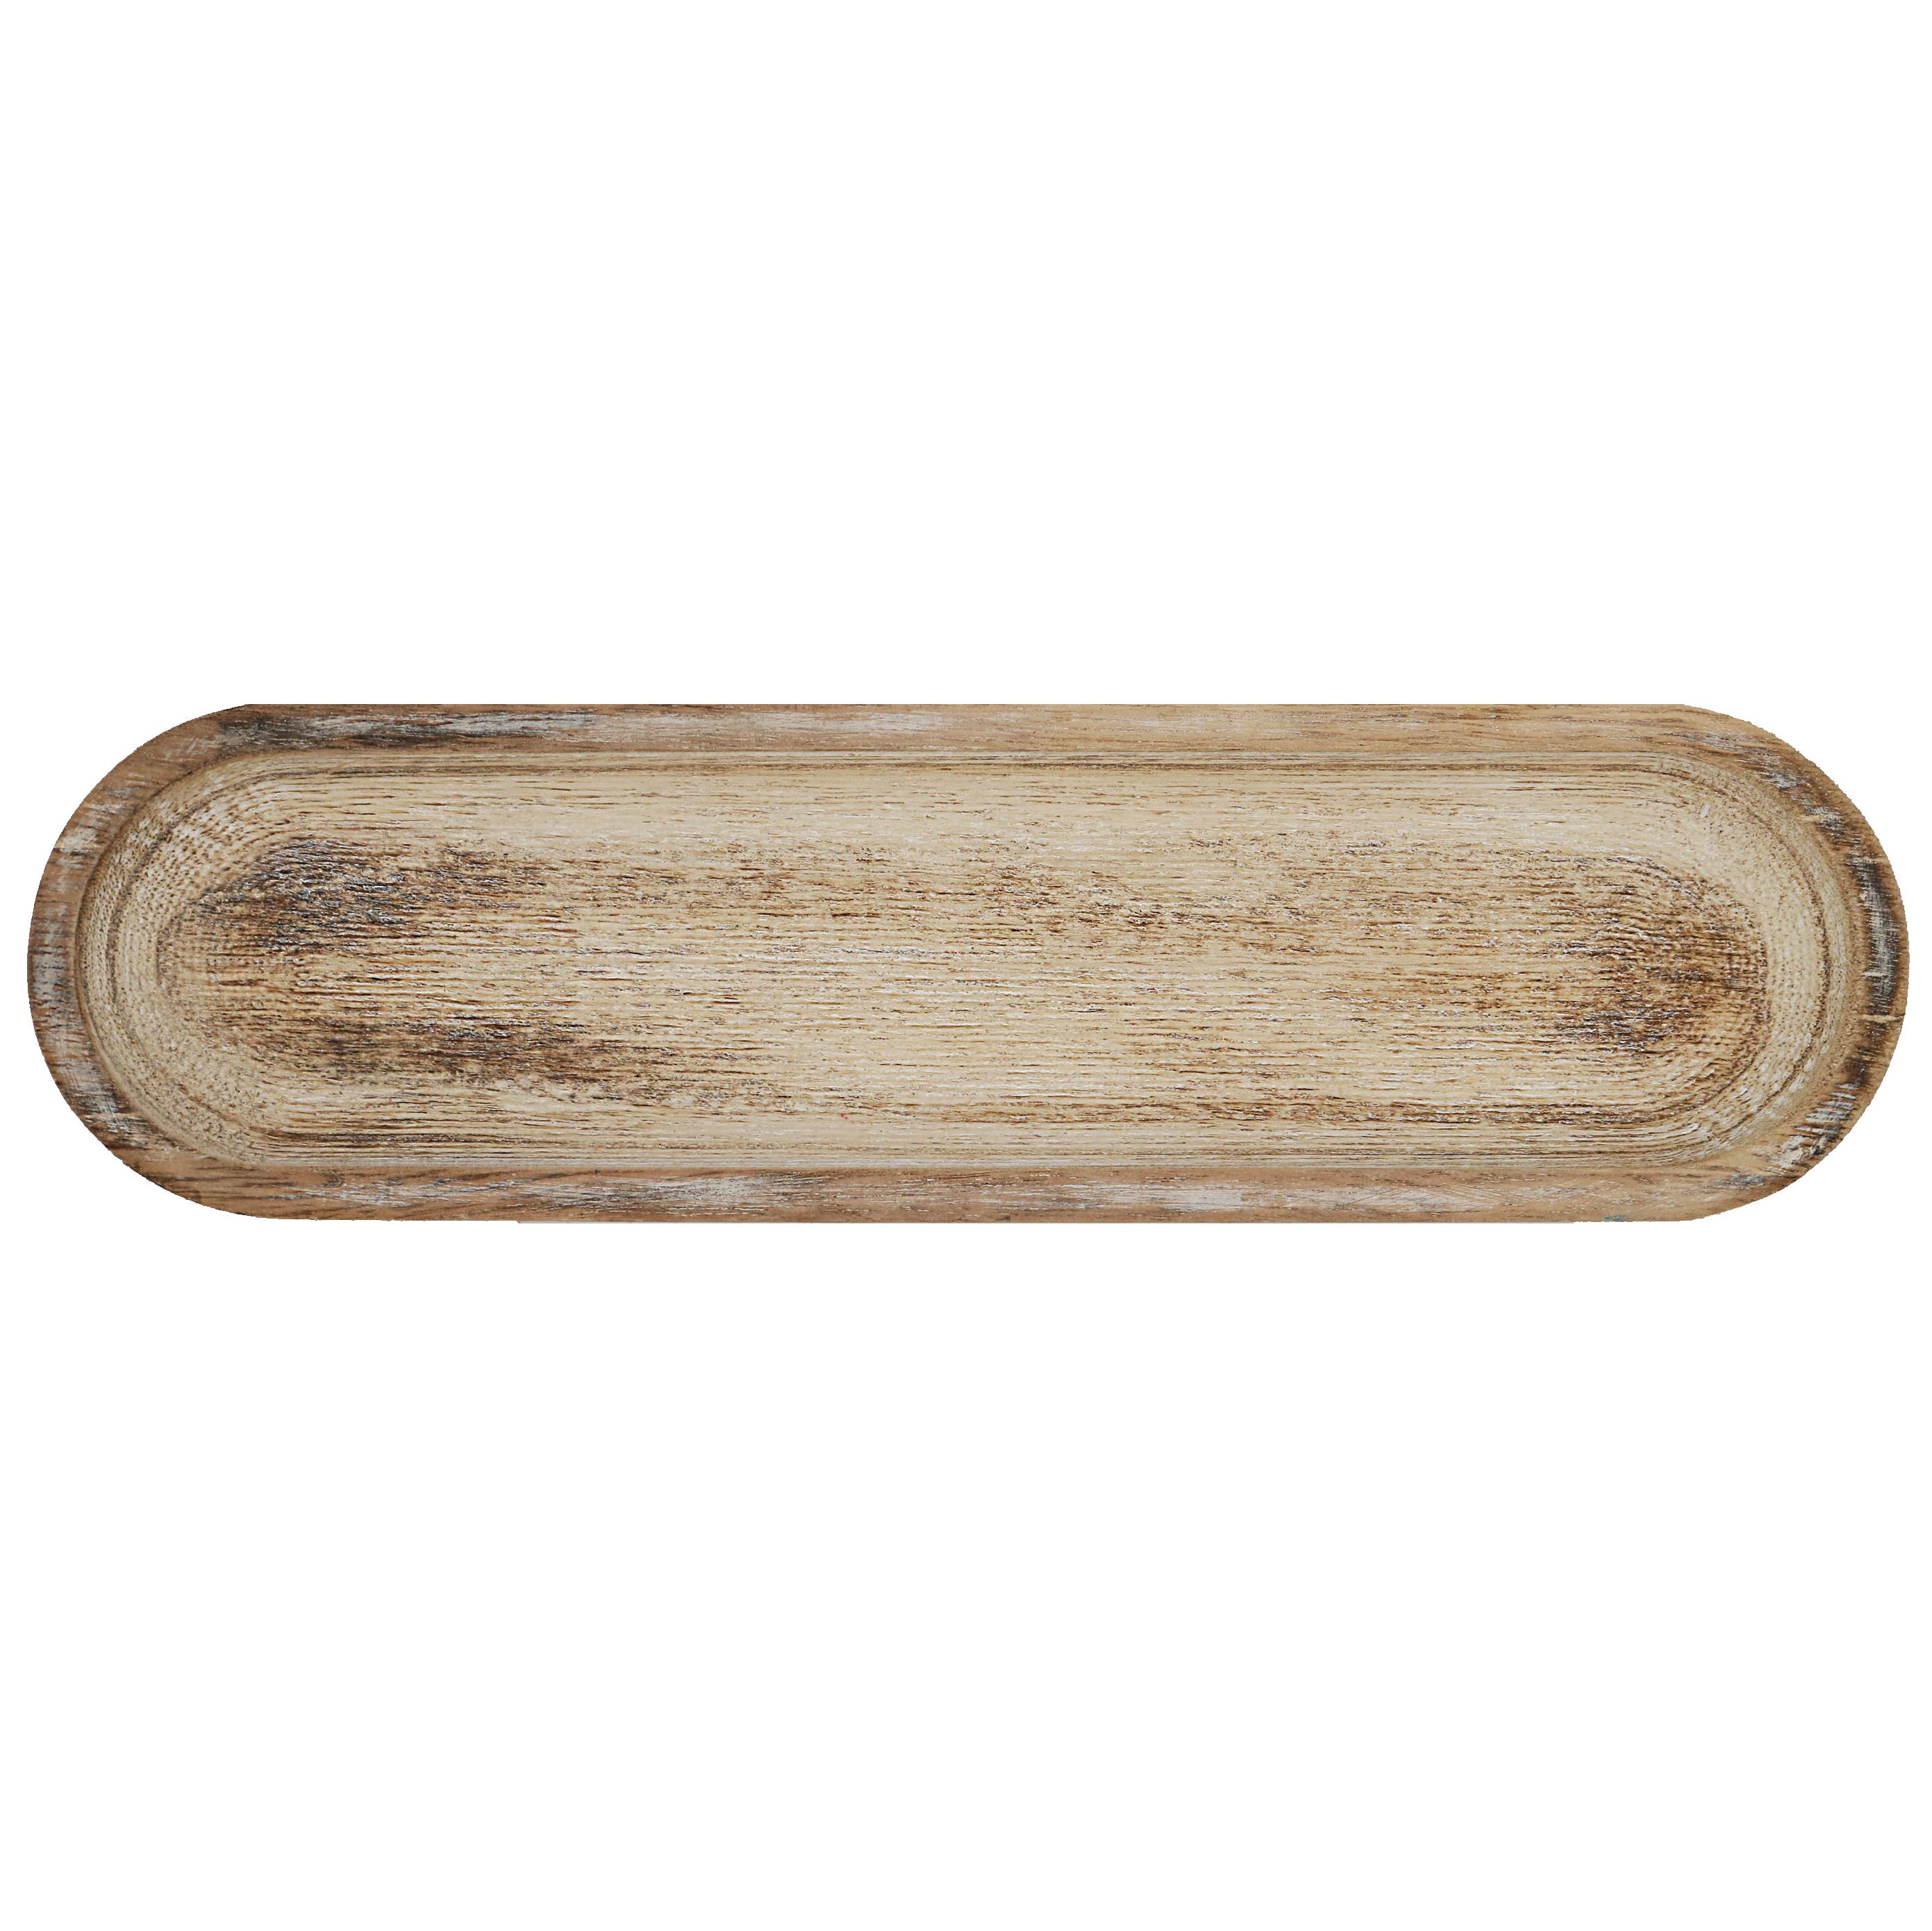 Large Wood Tray - Rustic - 14x4